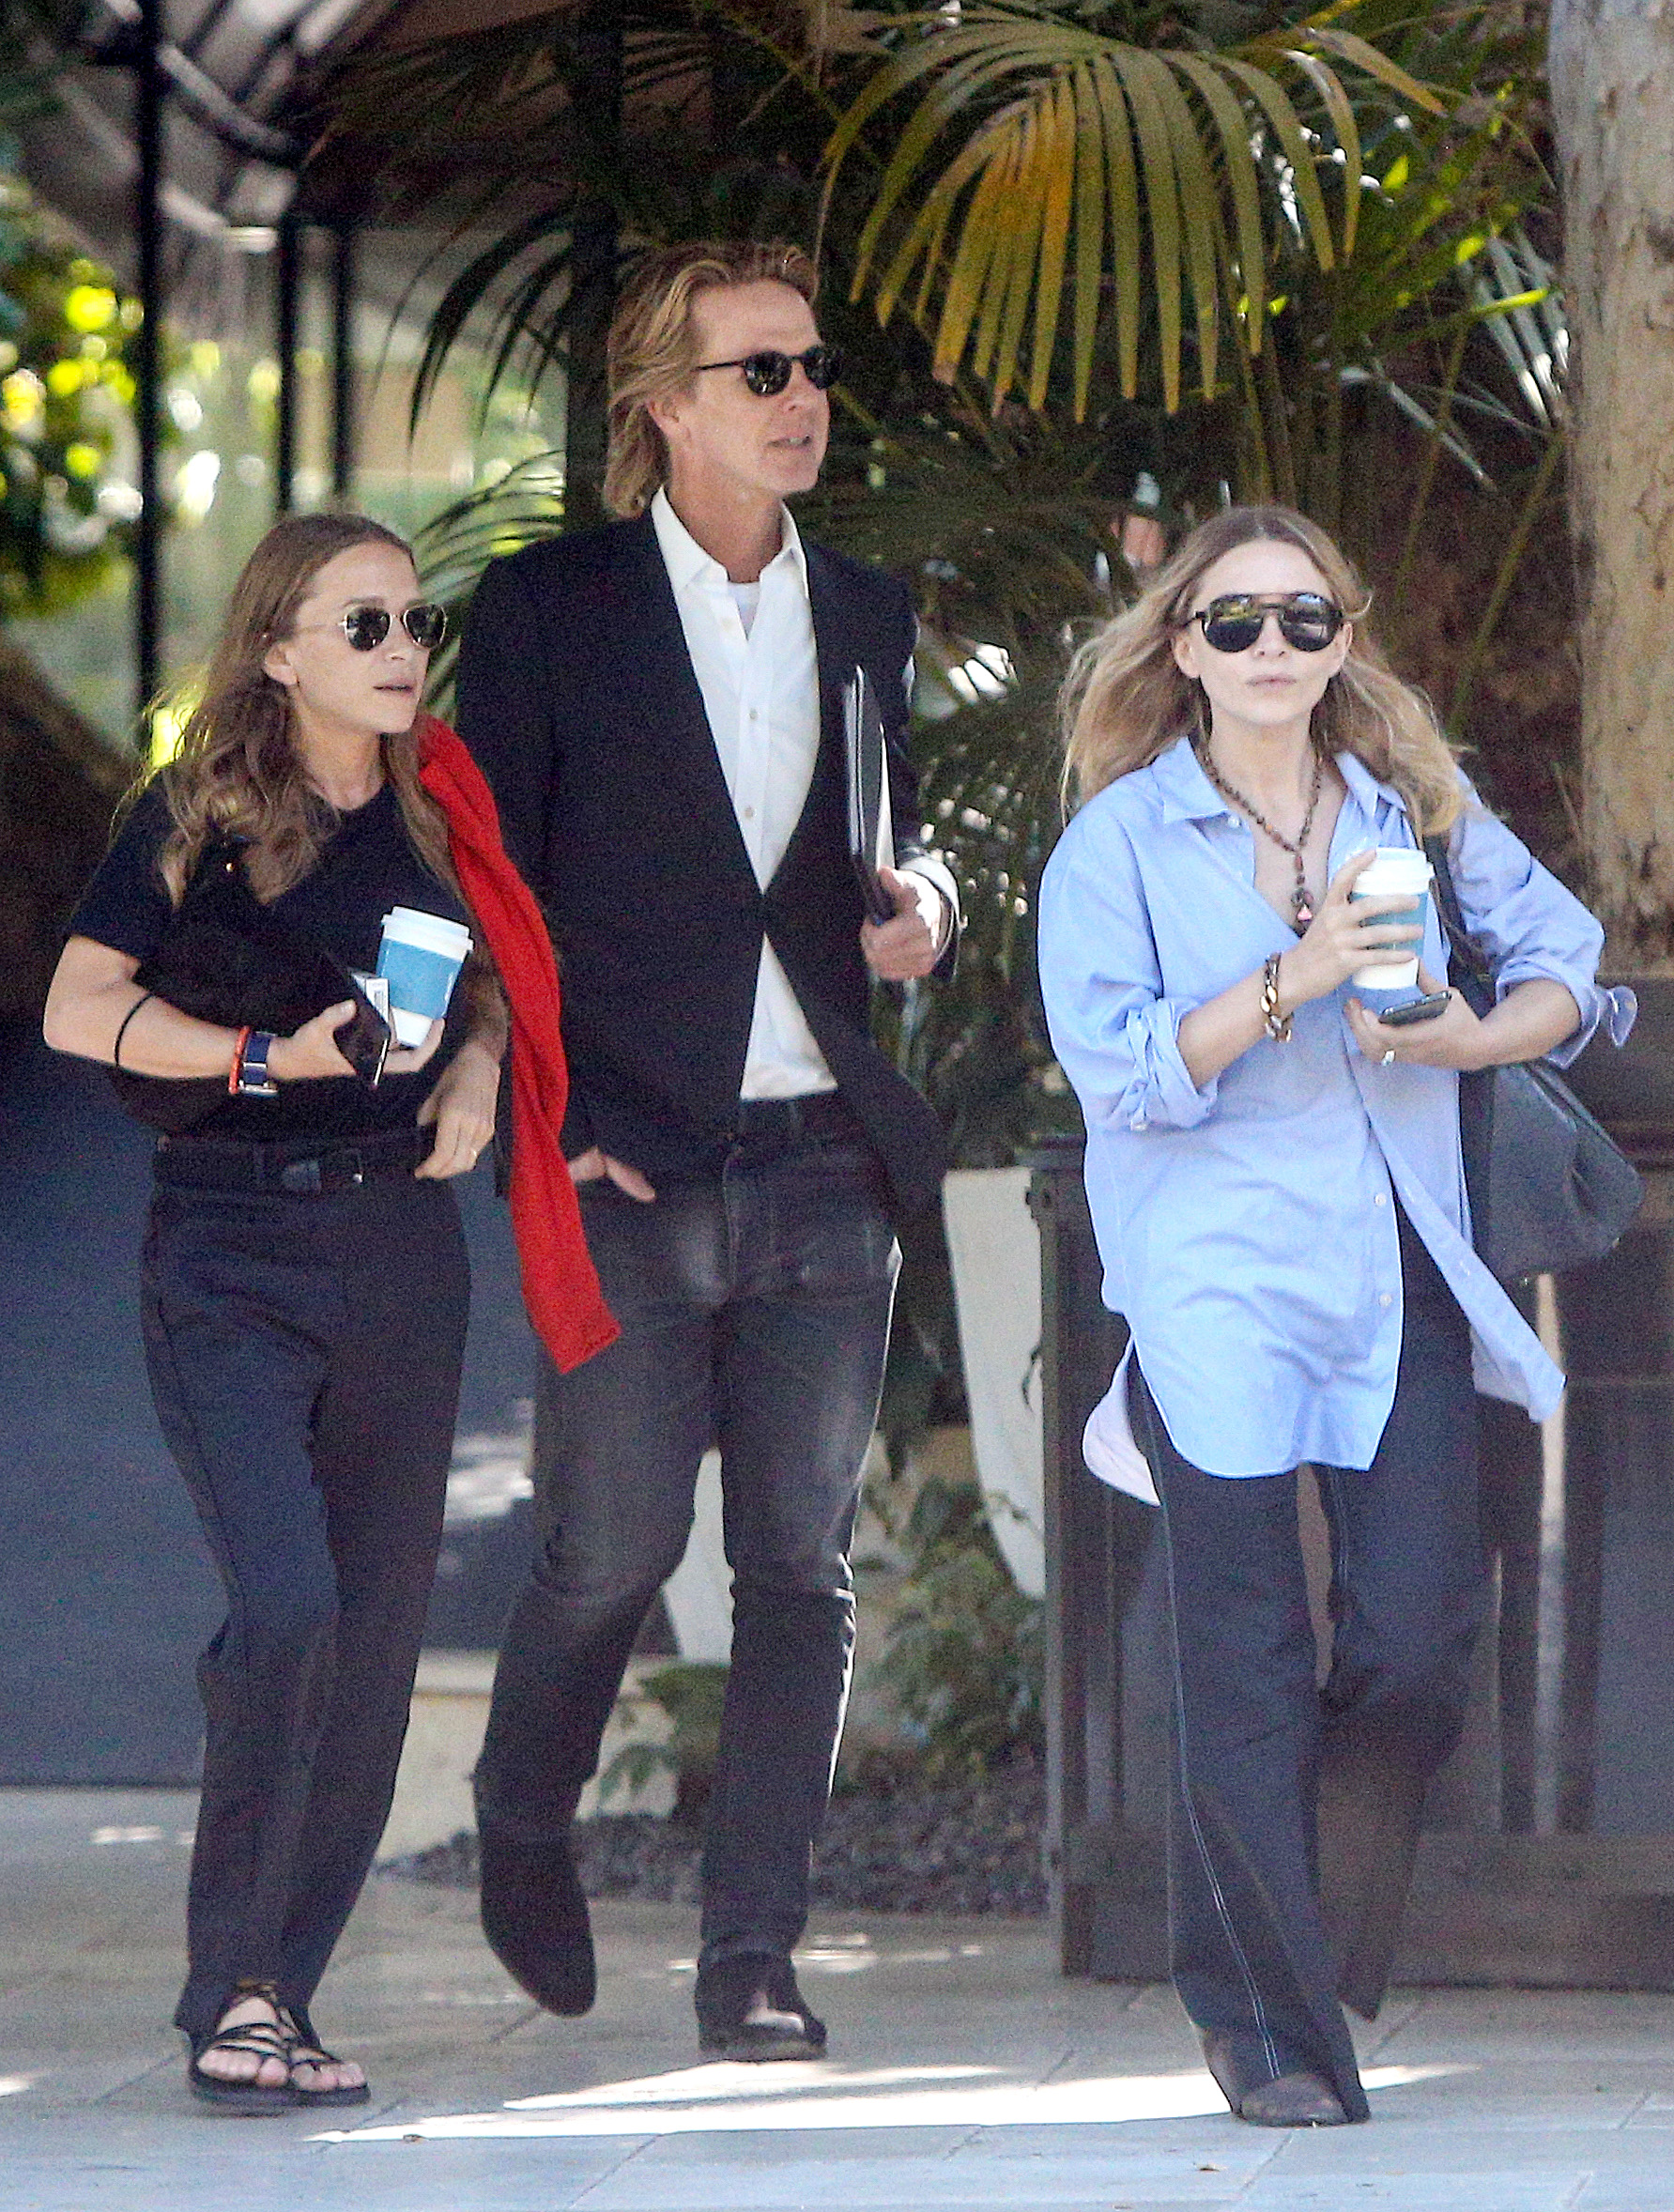 The Olsen Look Chic While Stepping Out for Meeting in